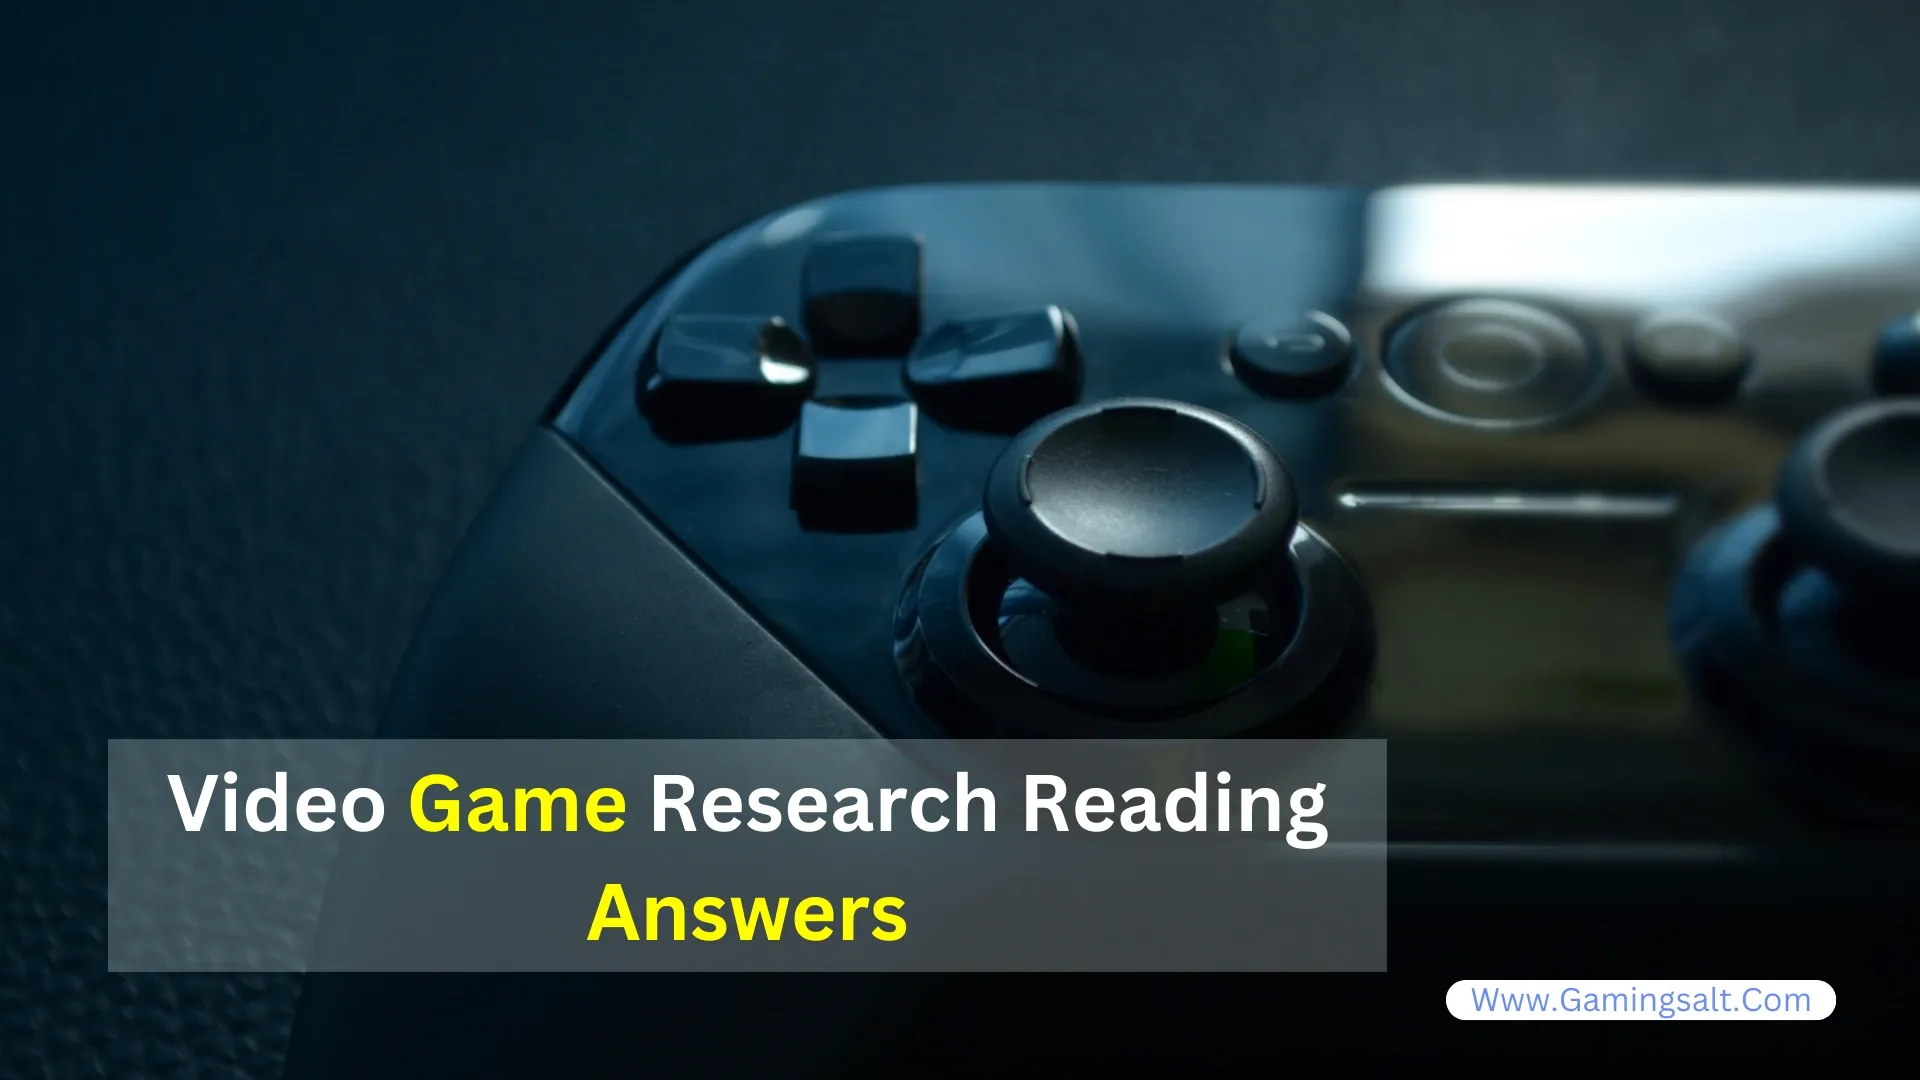 Video Game Research Reading Answers